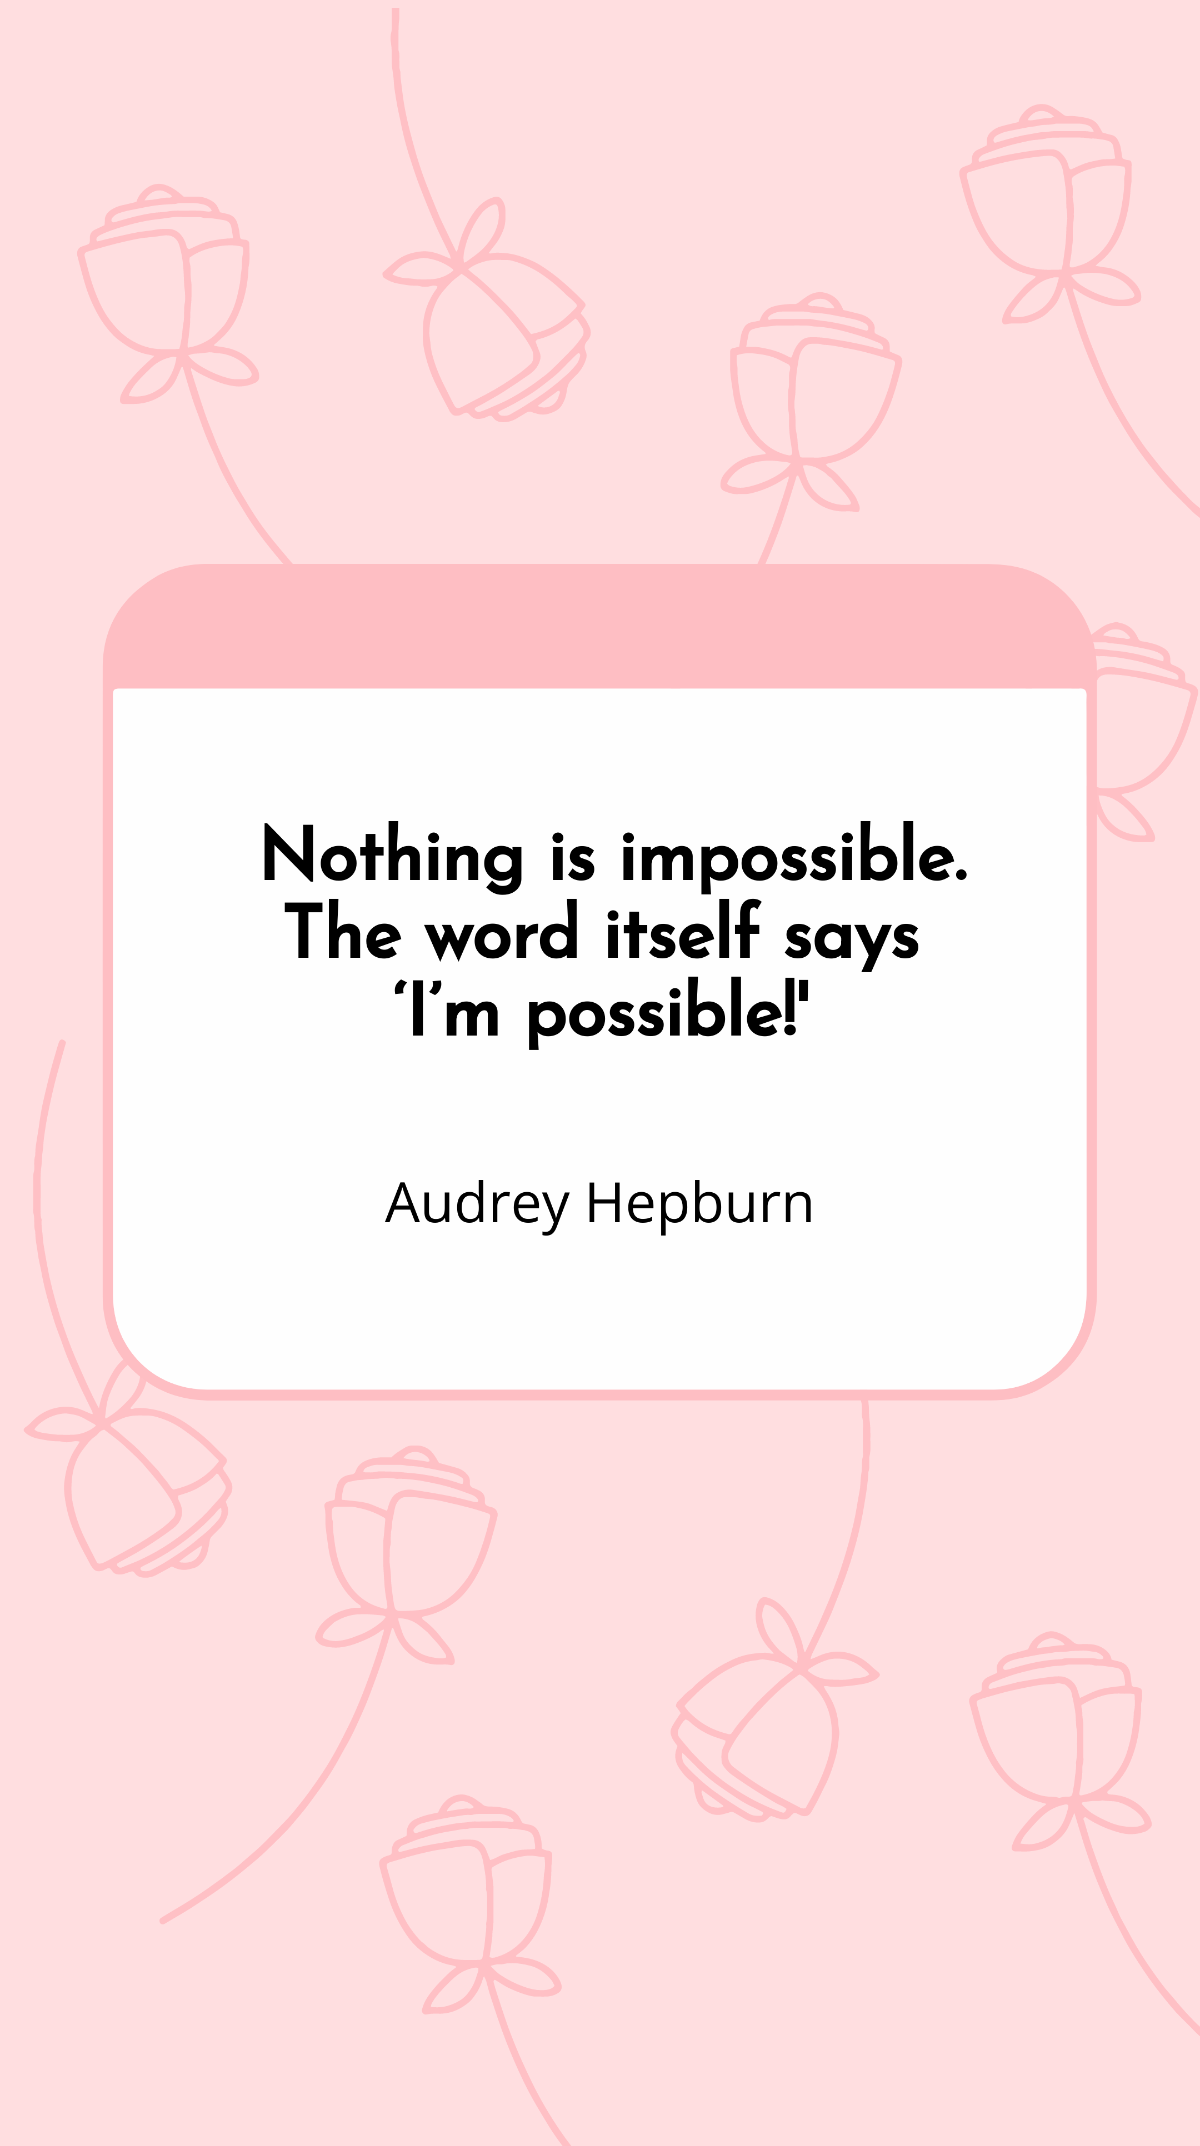 Audrey Hepburn - Nothing is impossible. The word itself says ‘I’m possible!' Template